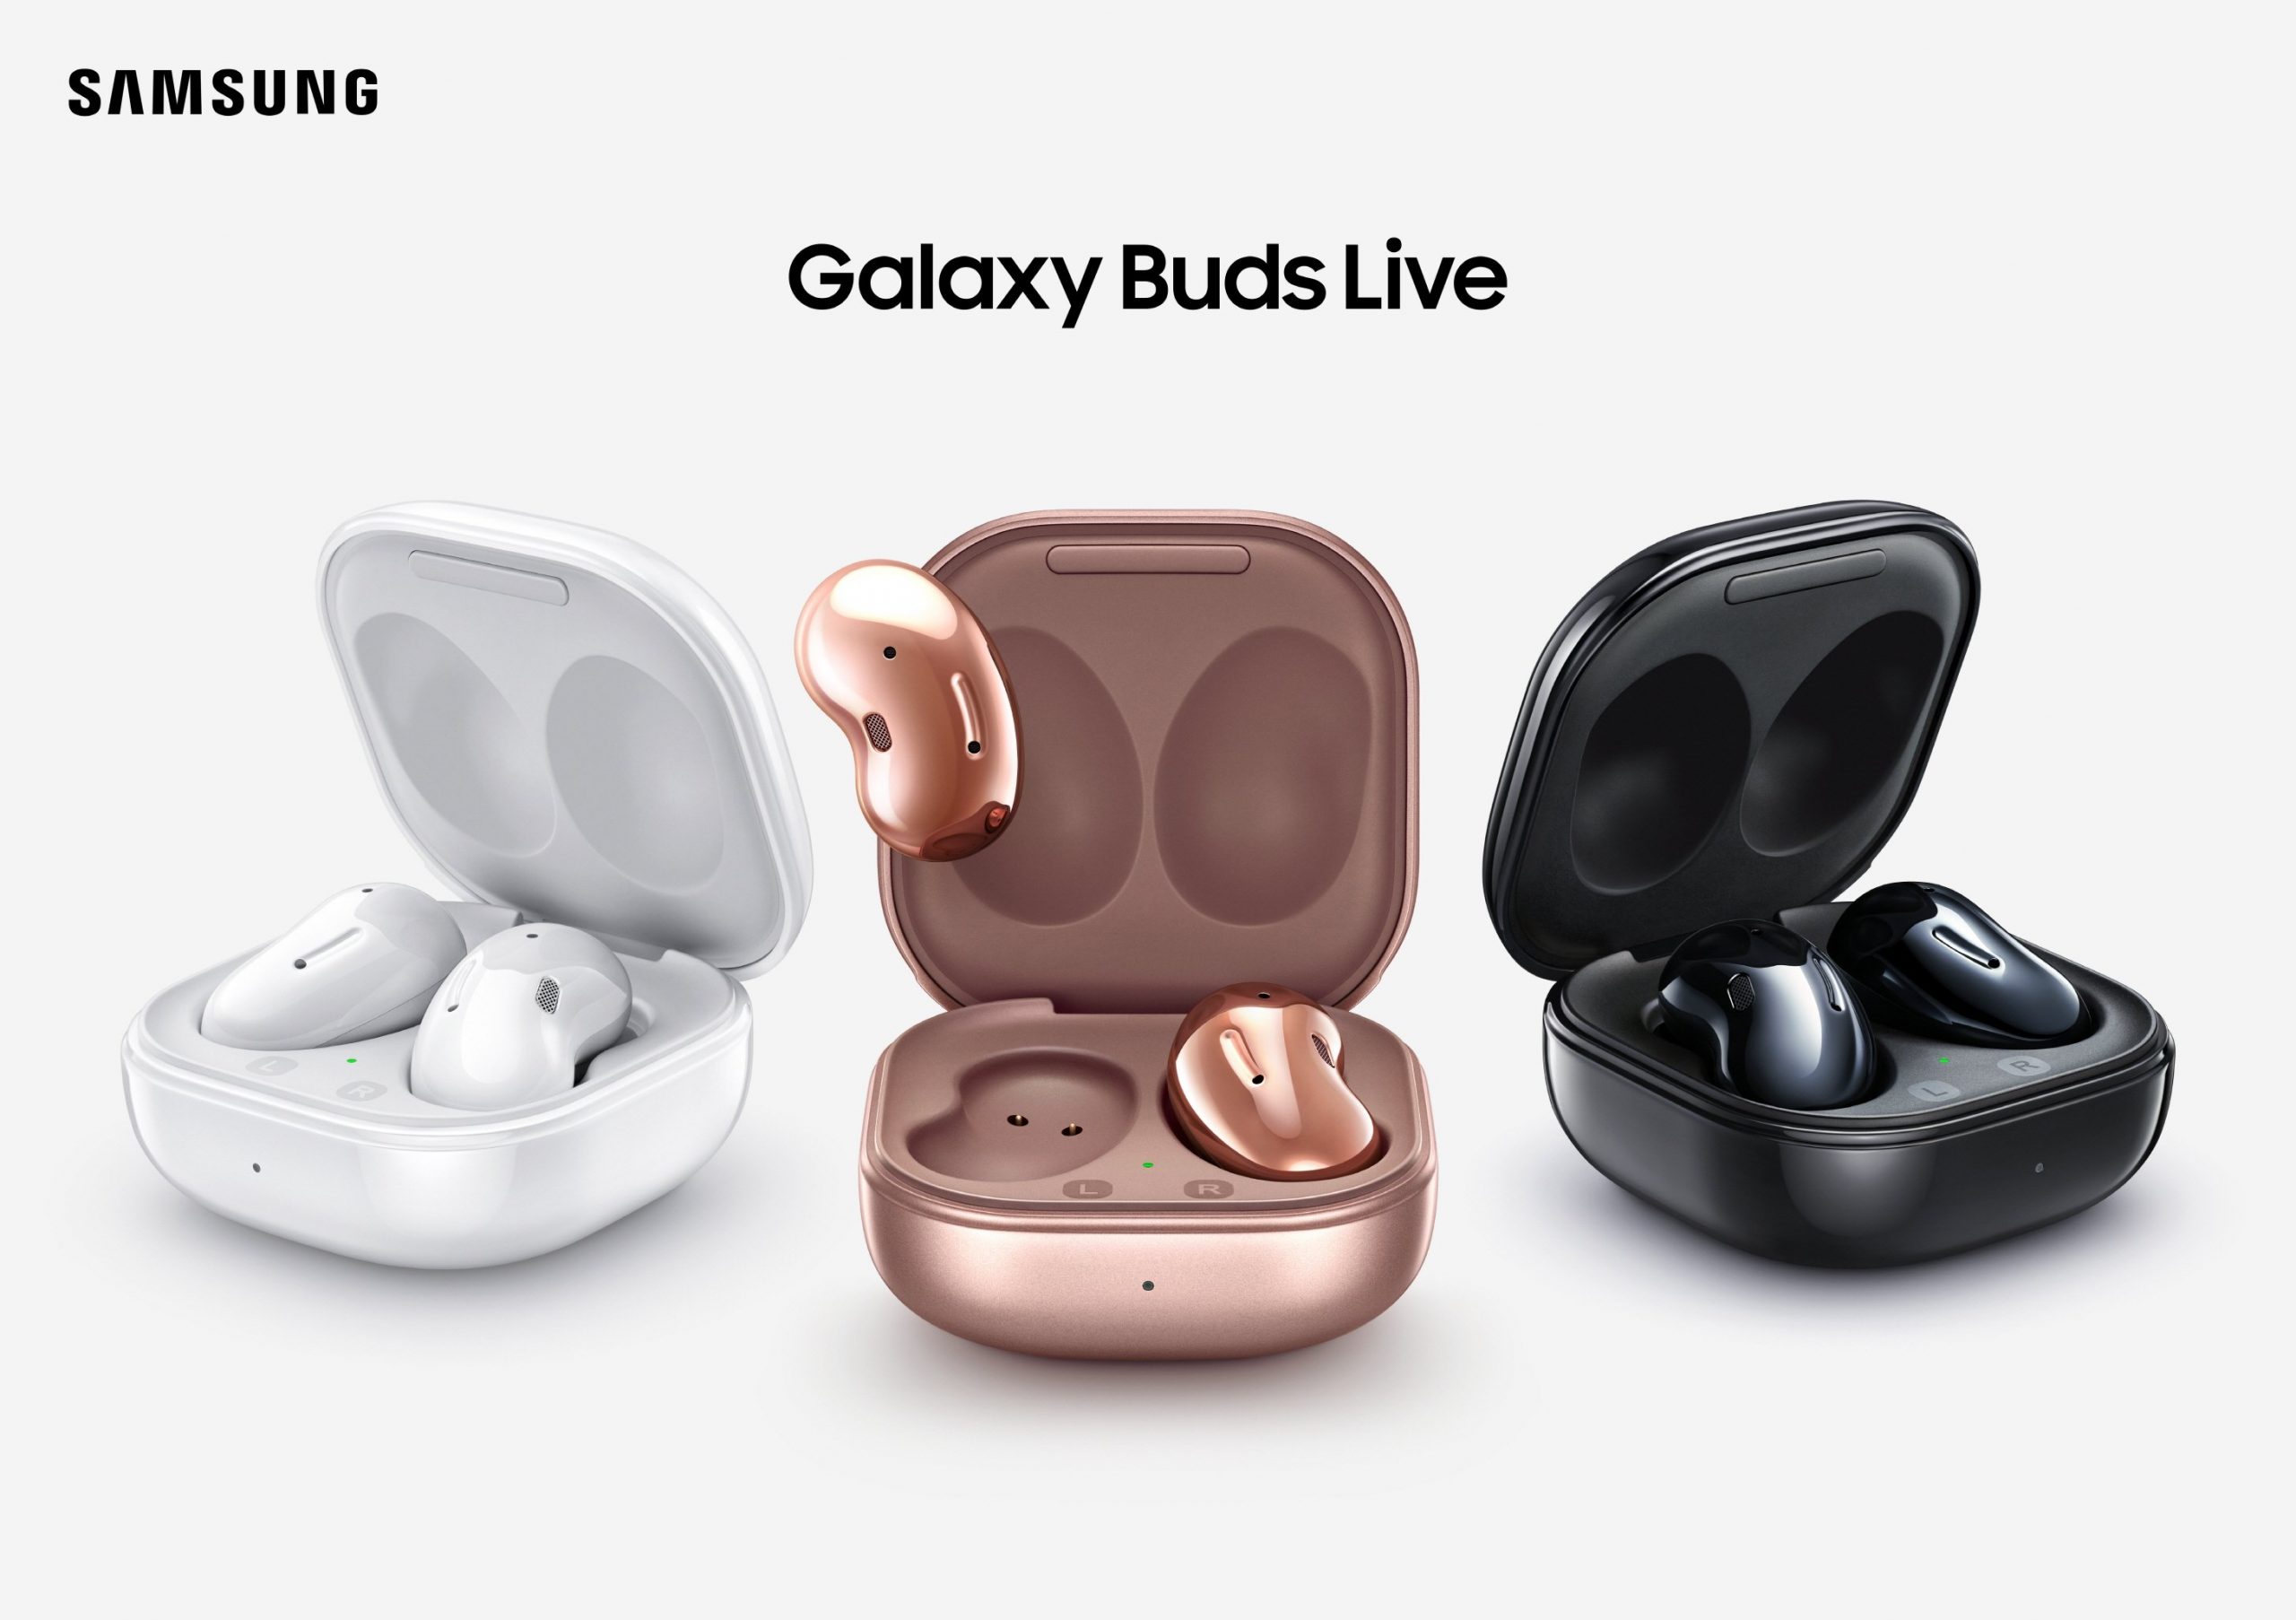 Samsung Galaxy Buds Sound might be the company’s next earbuds: Report